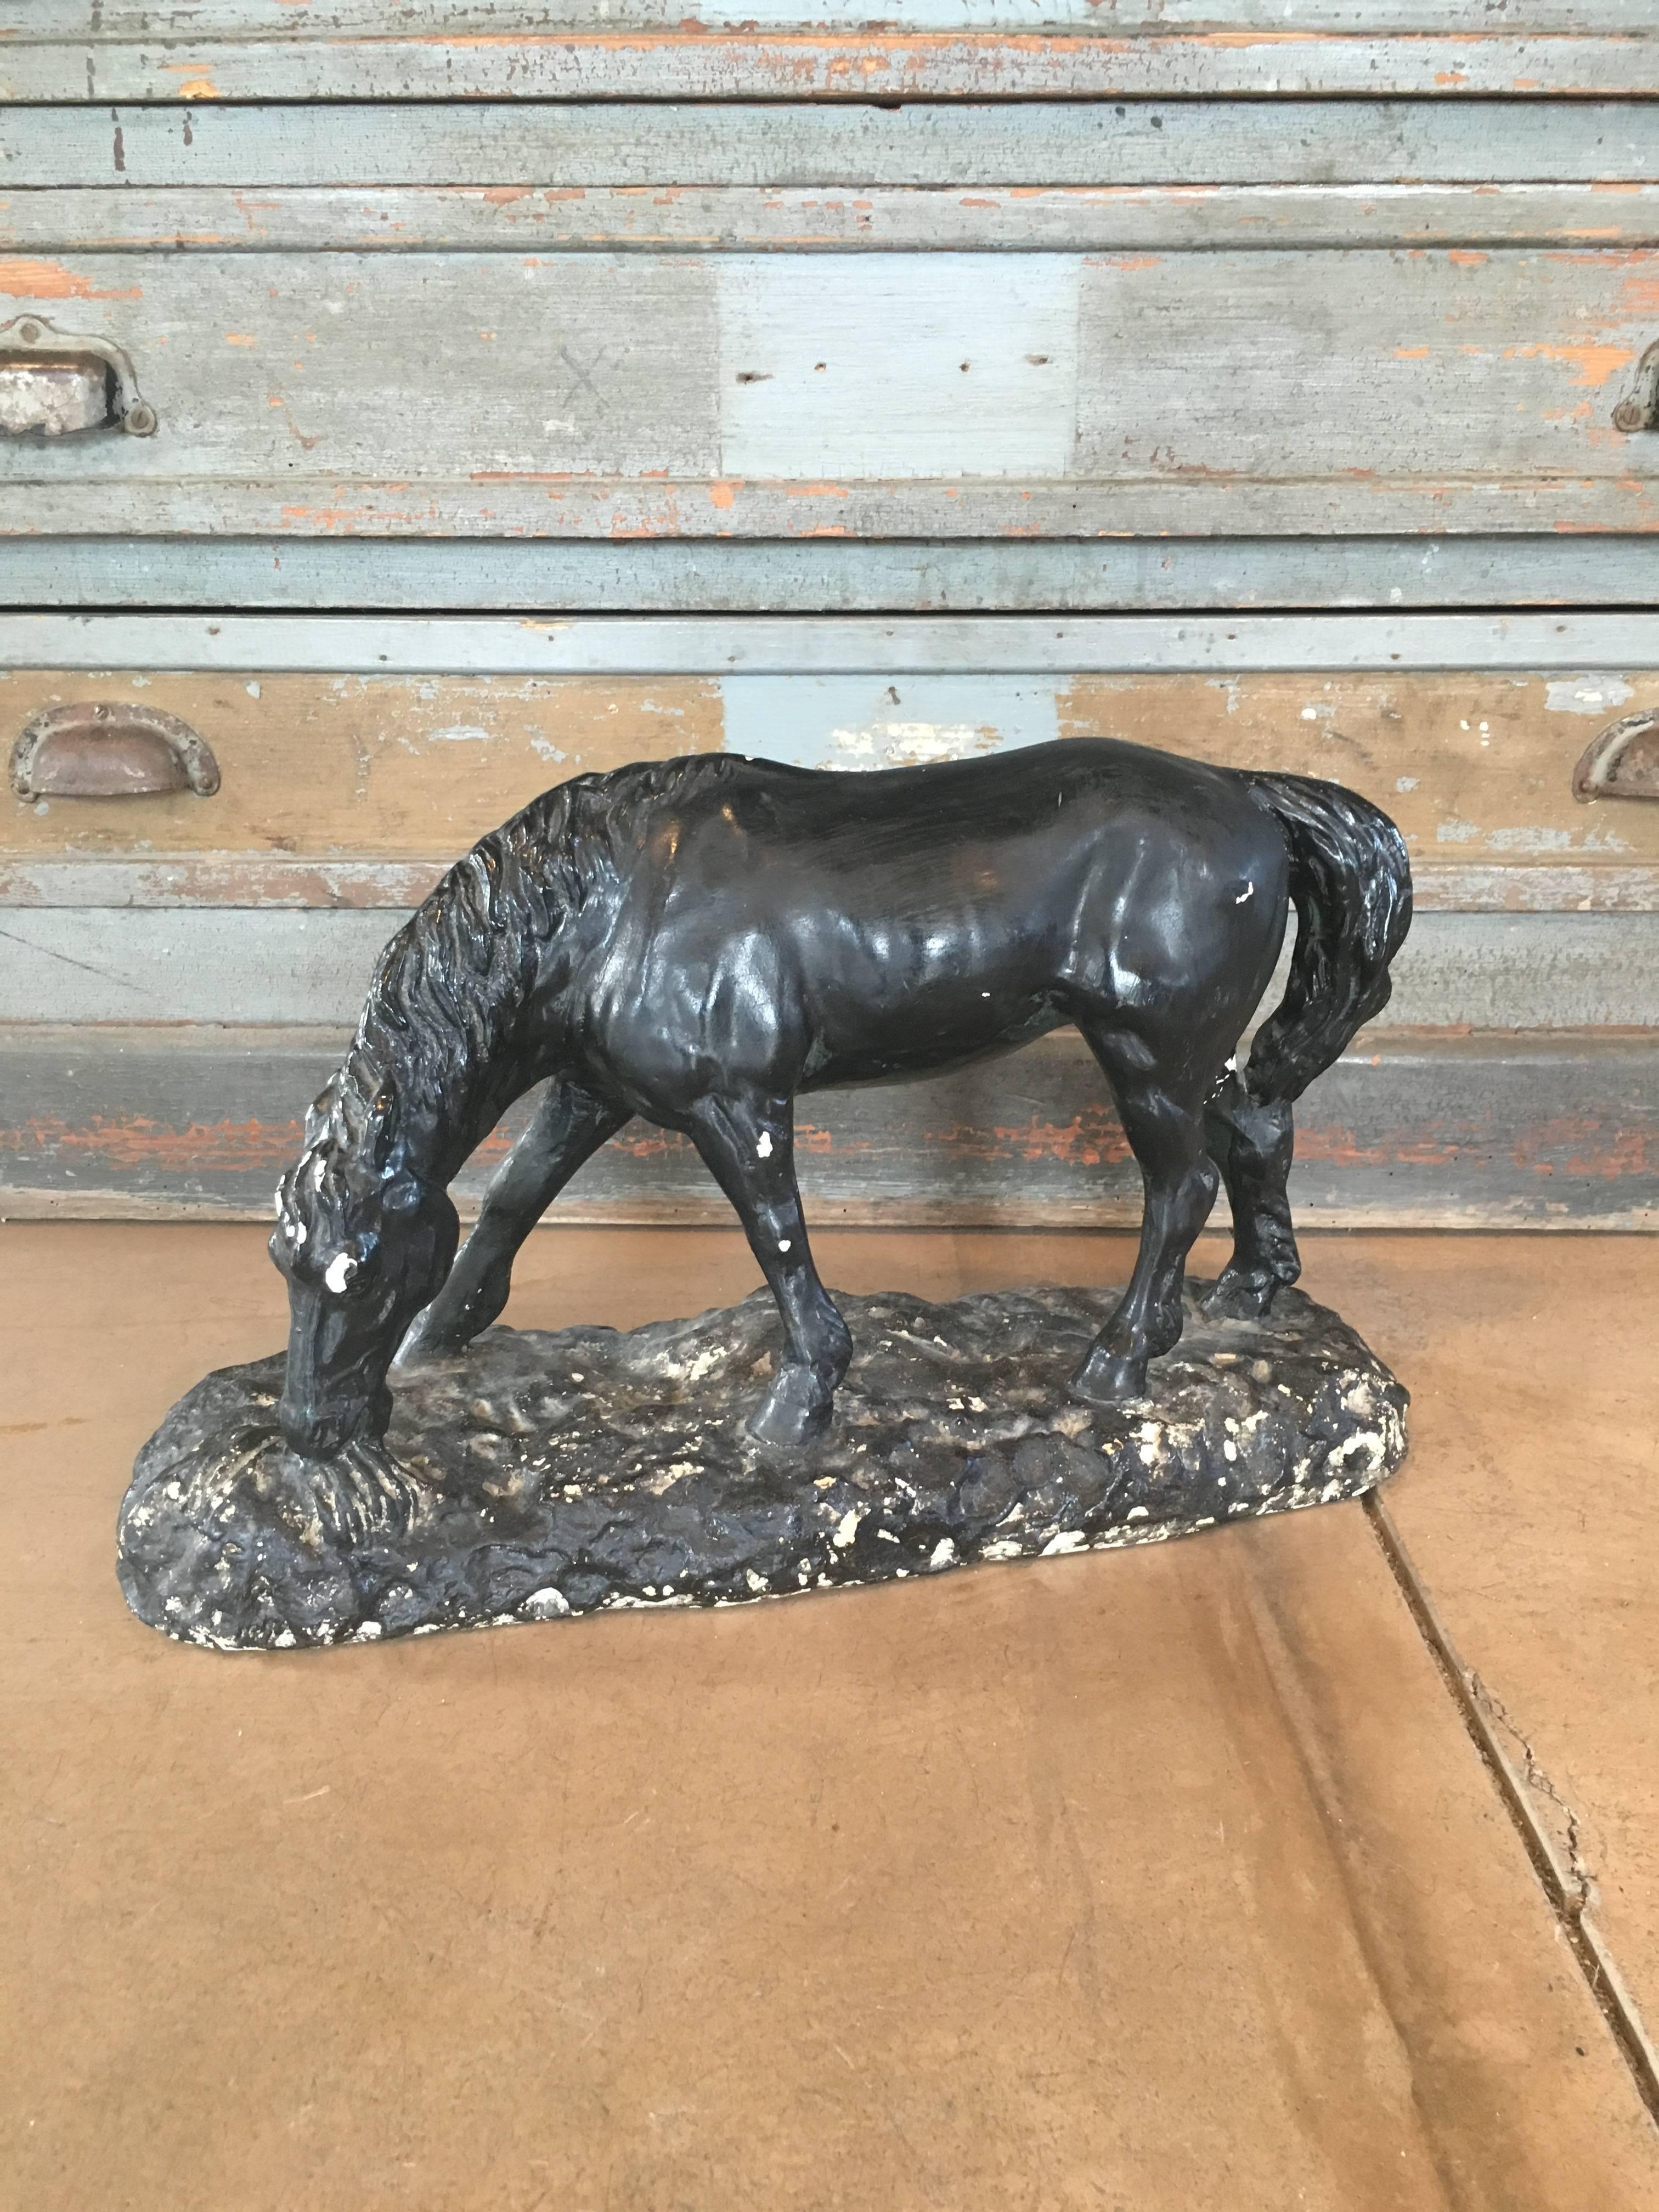 Vintage plaster horse statue from, circa 1900, France. Painted black with some plaster visible below. Minor wear consistent with age and use.

